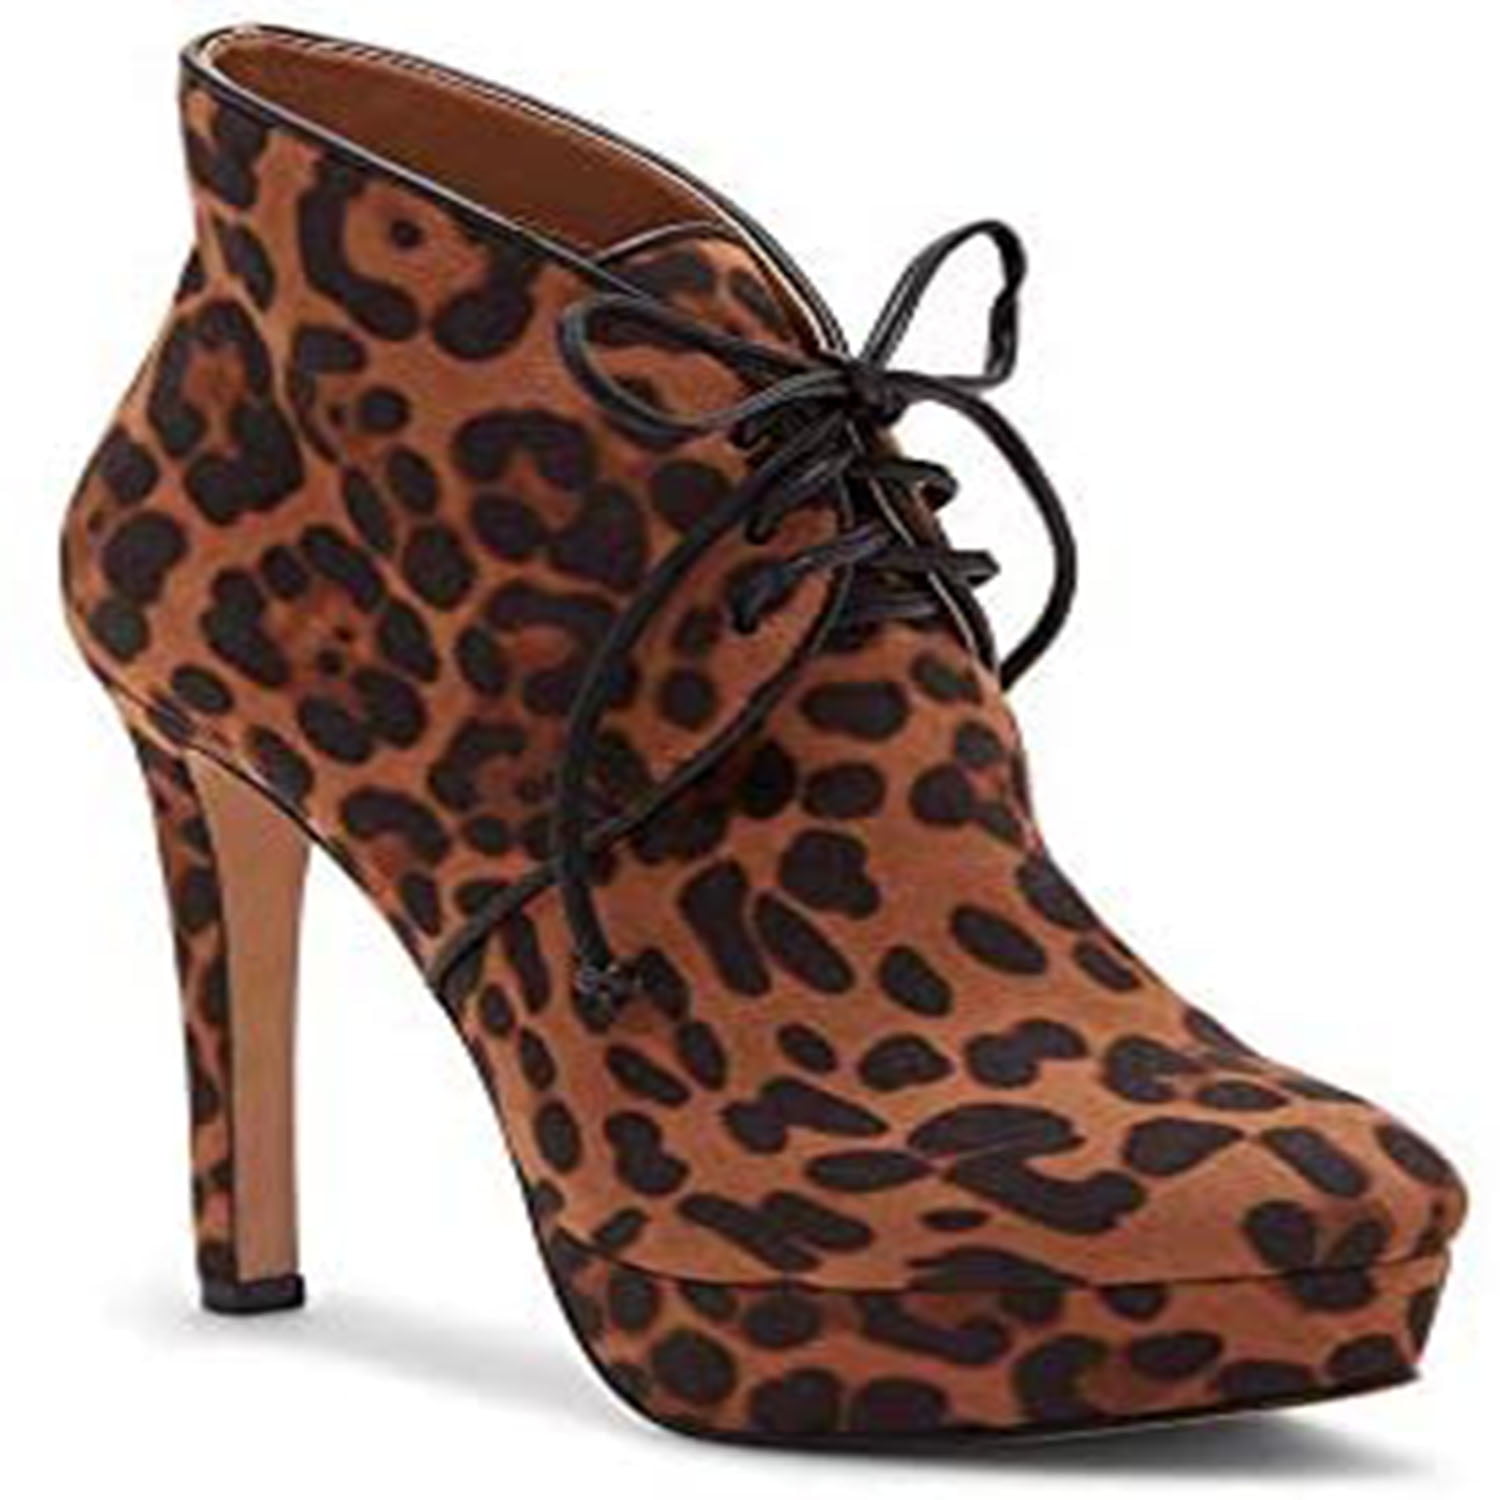 Jessica Simpson Women's Riene Mid Calf Boot Natural Leopard Lace Up Booties 